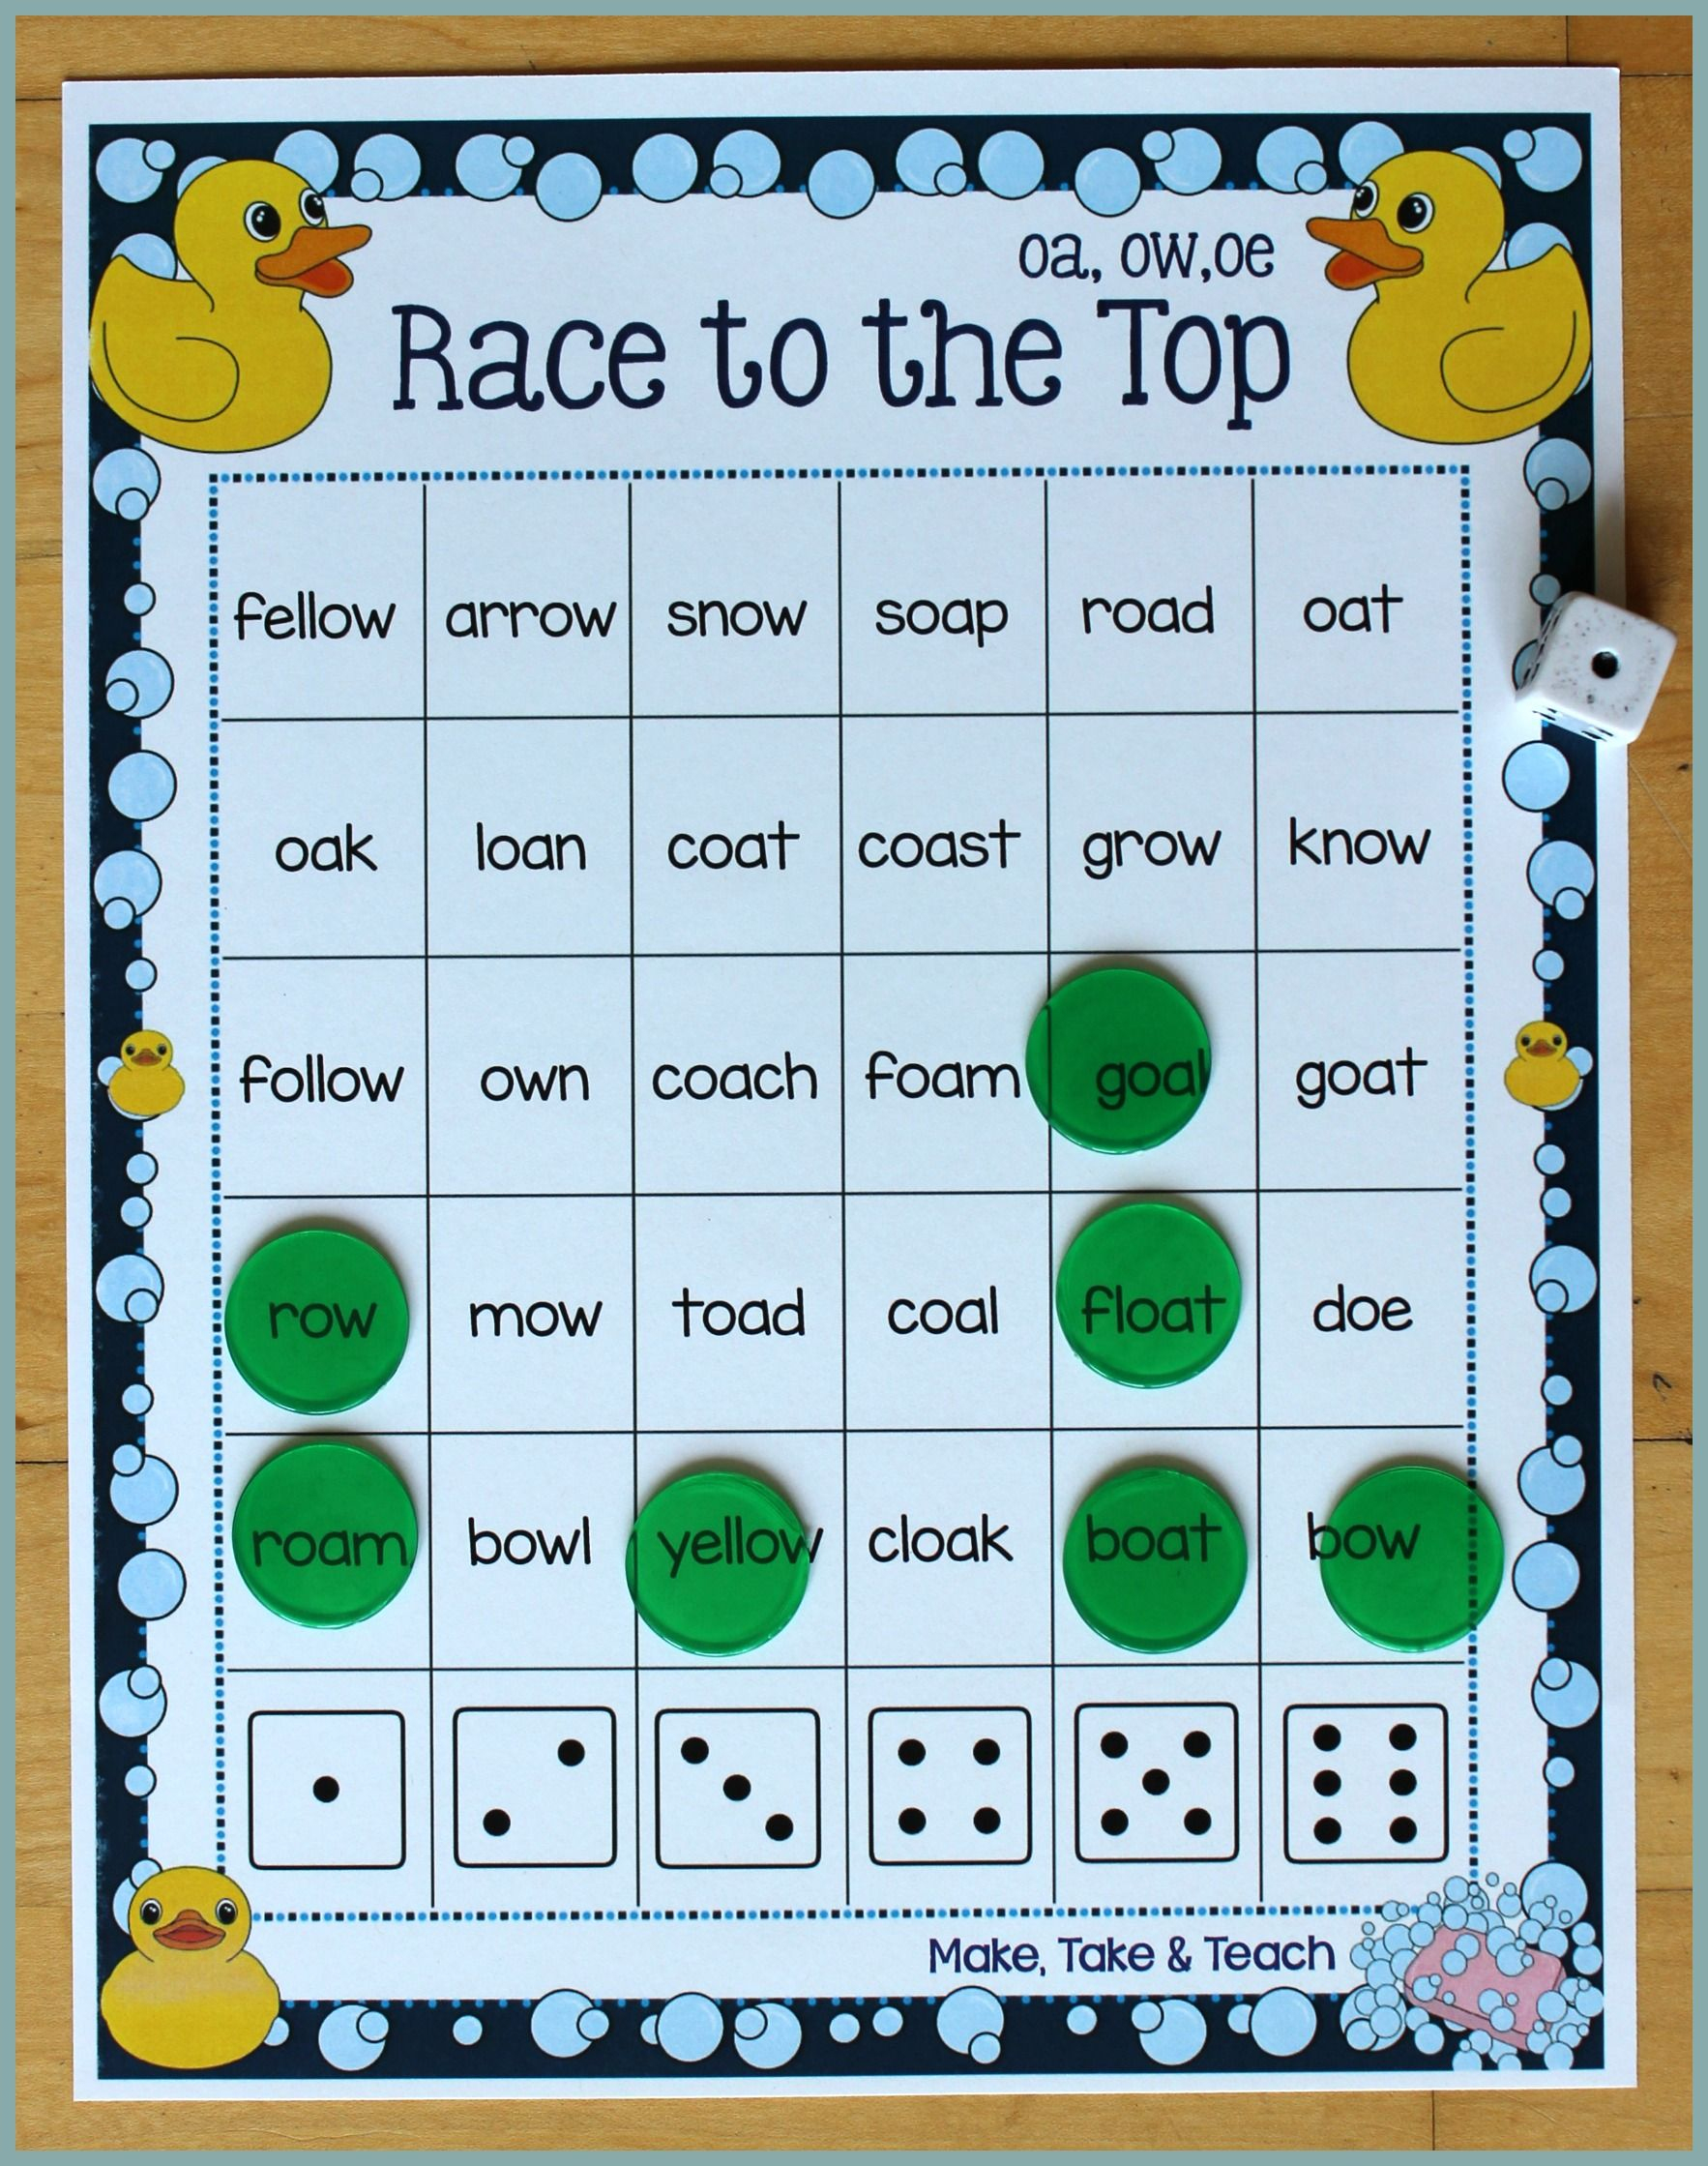 Activities For Teaching The Oa/ow/oe Digraphs | Phonics